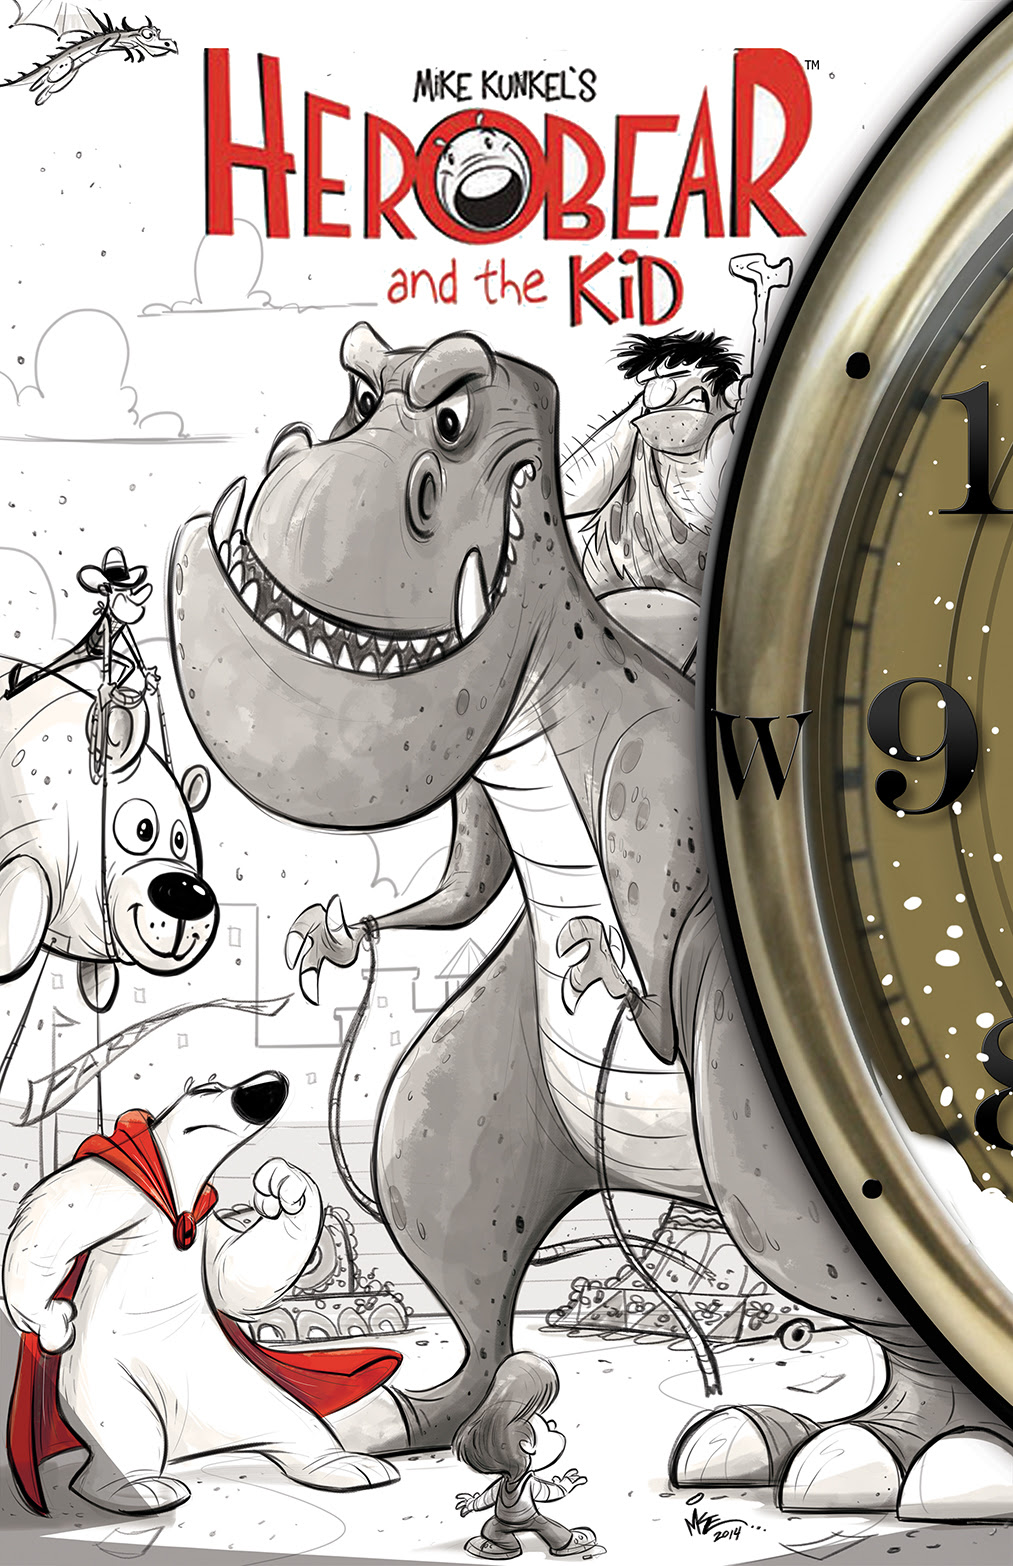 HERO BEAR AND THE KID: SAVING TIME #2 Cover by Mike Kunkel